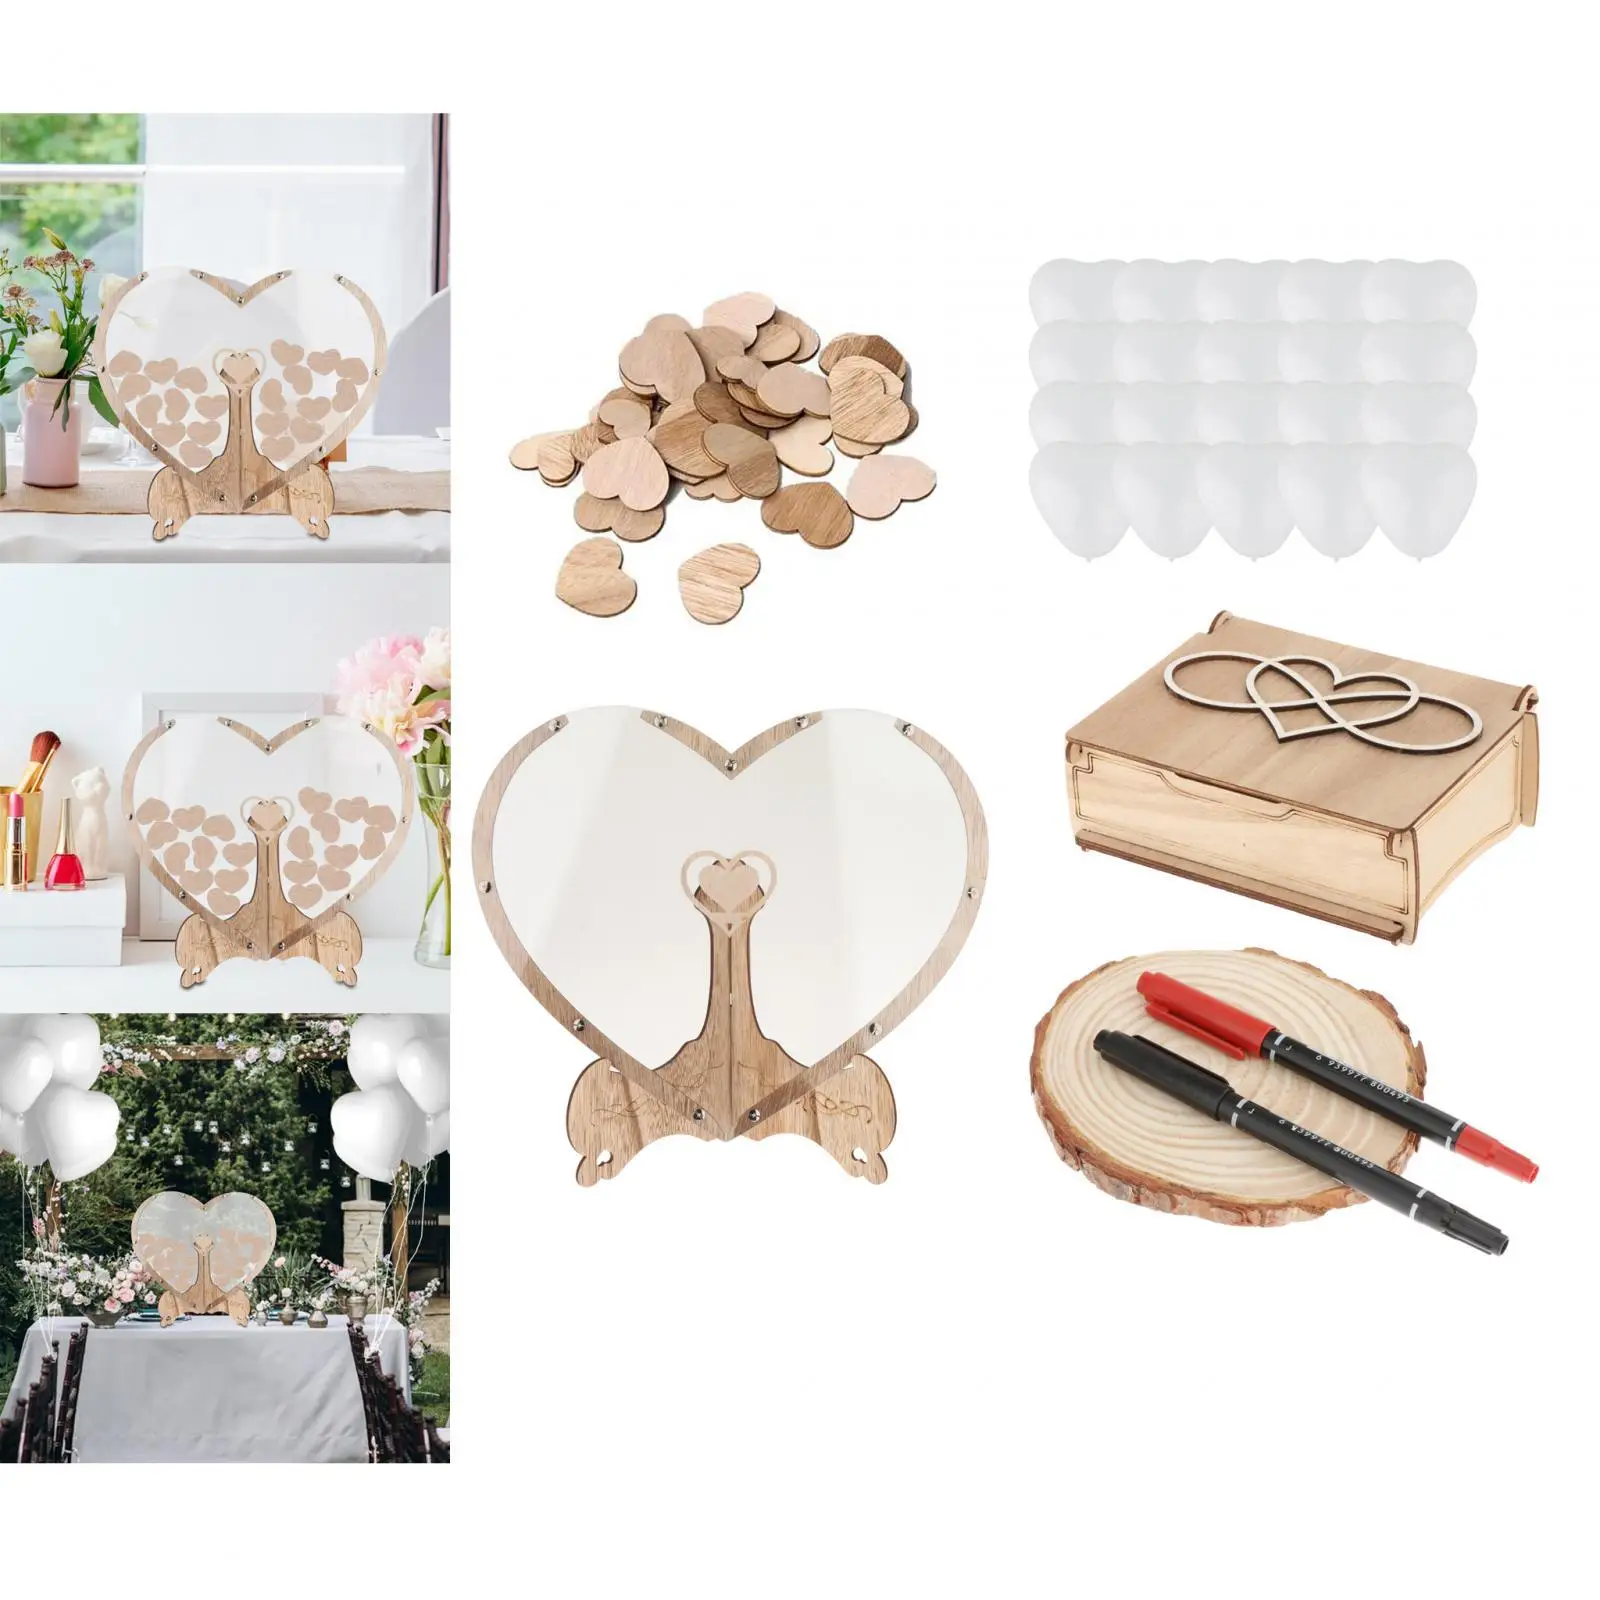 Guest Book Wedding with Wooden Hearts Unique Wedding Guest Book Frame with heart for Table Centerpieces Party Favor Decoration